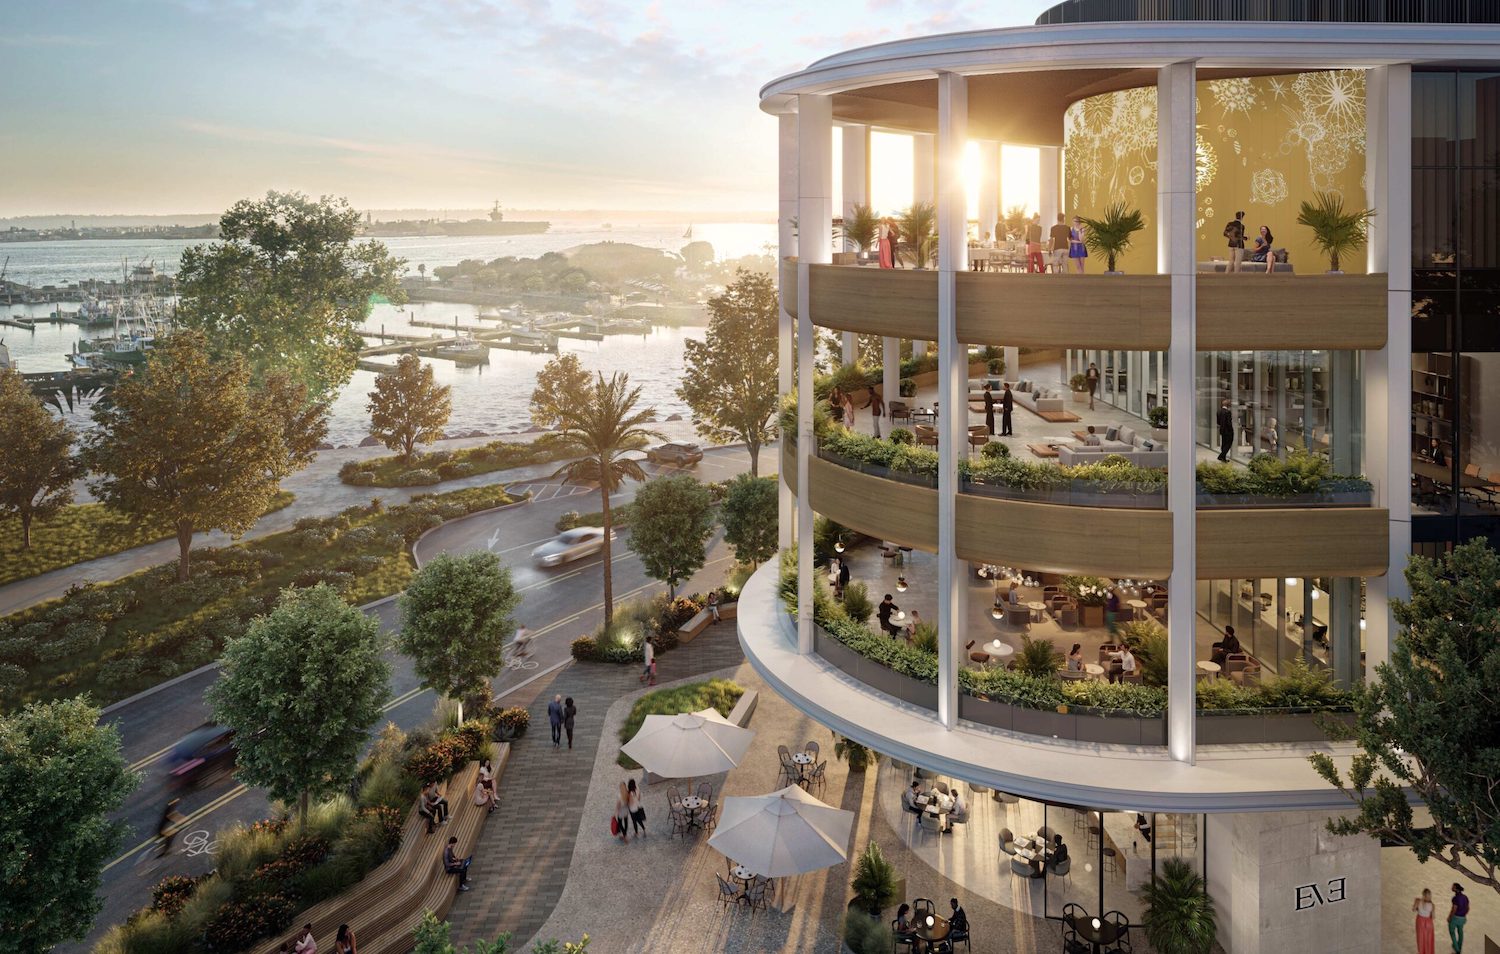 New event space opening in San Diego by the bay called Eve developed by Petco Park Events and developers IQHQ